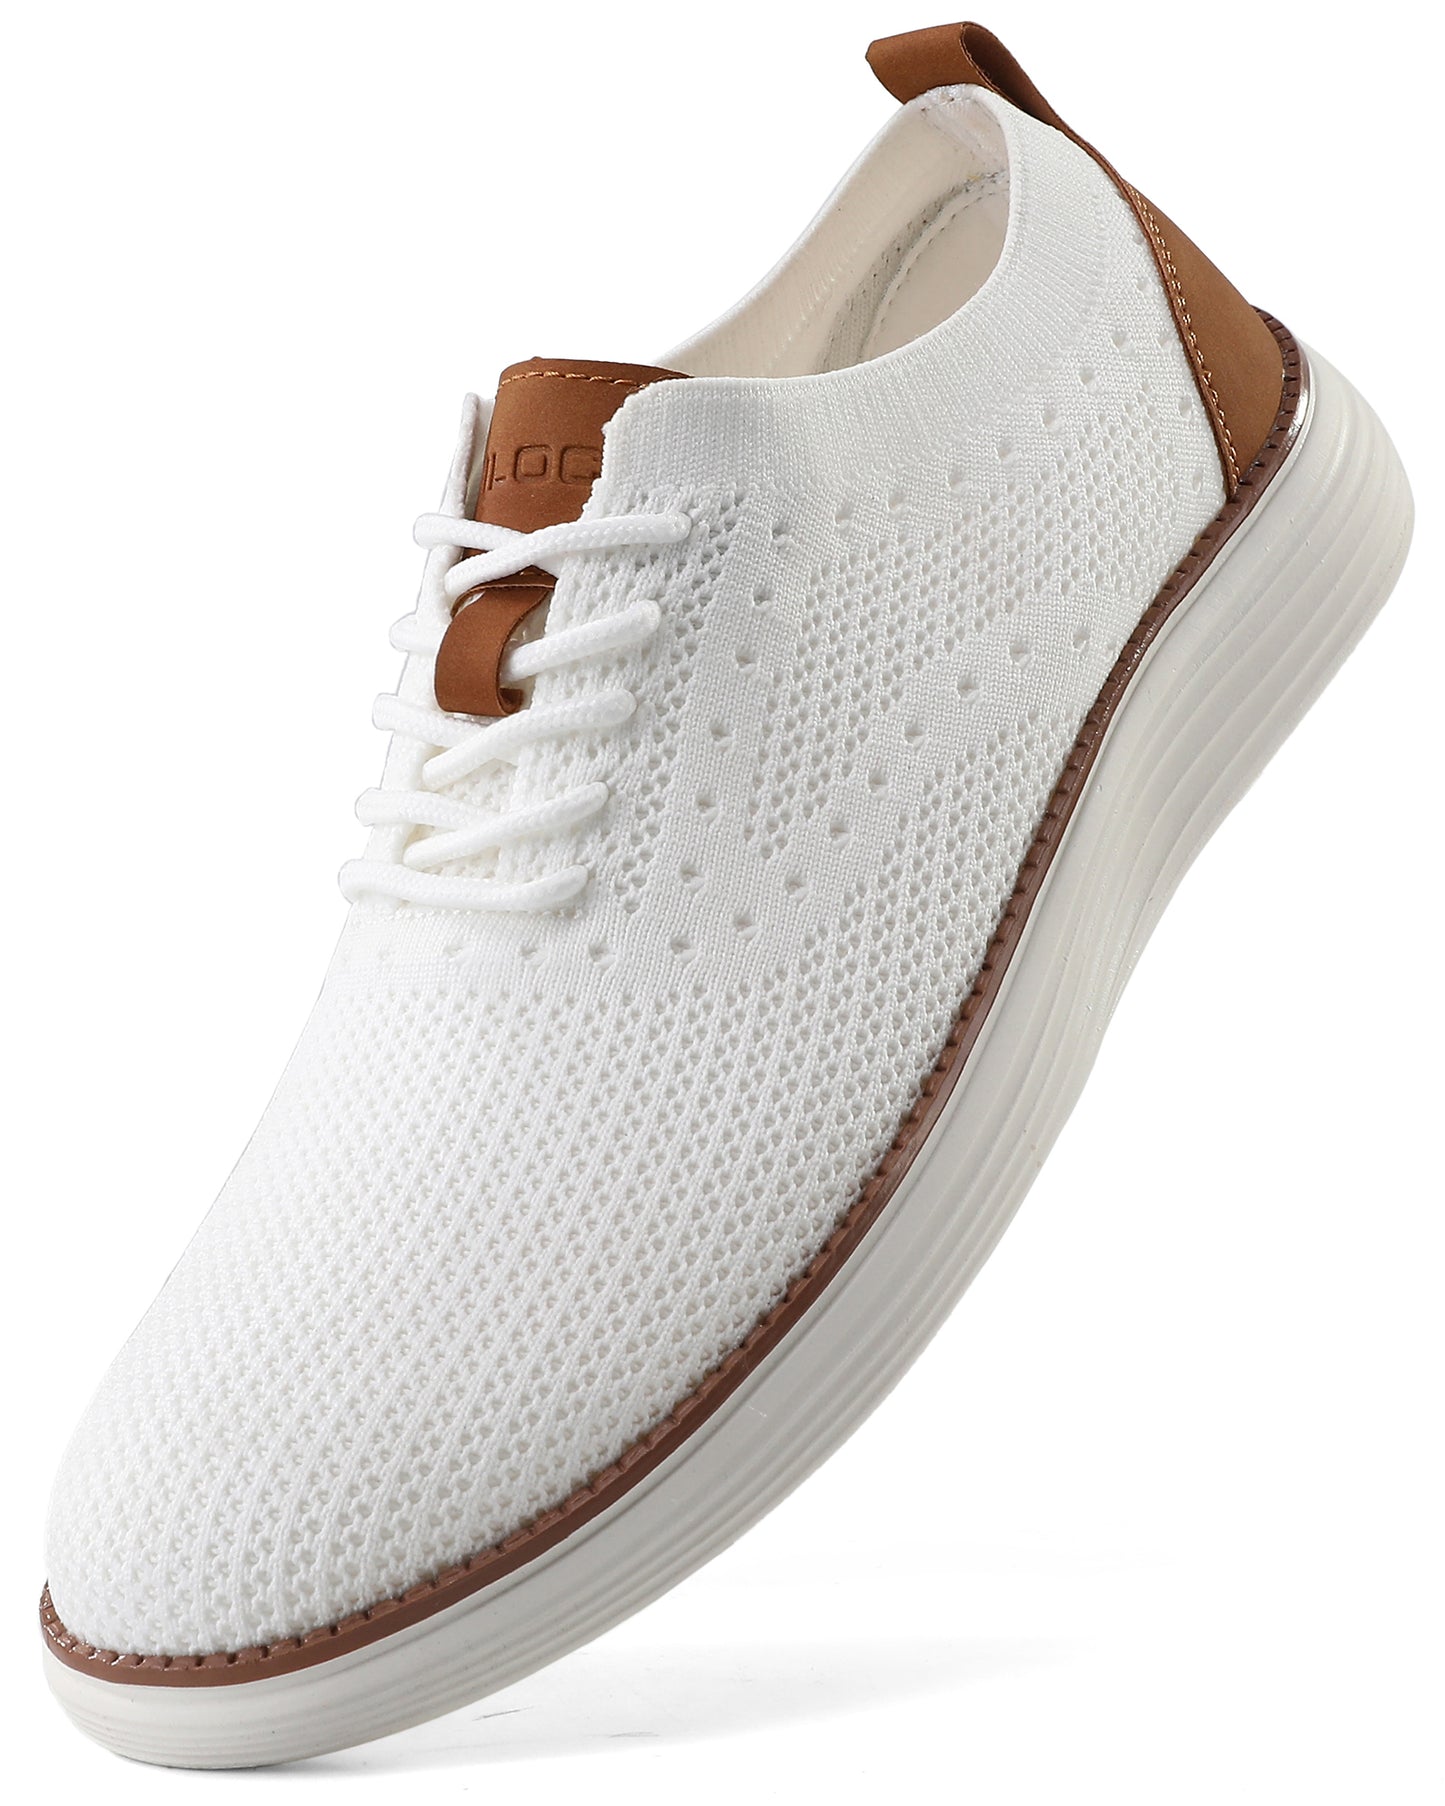 Men's Walking Shoes Mesh Oxfords Business Casual Tennis Comfortable Sneakers